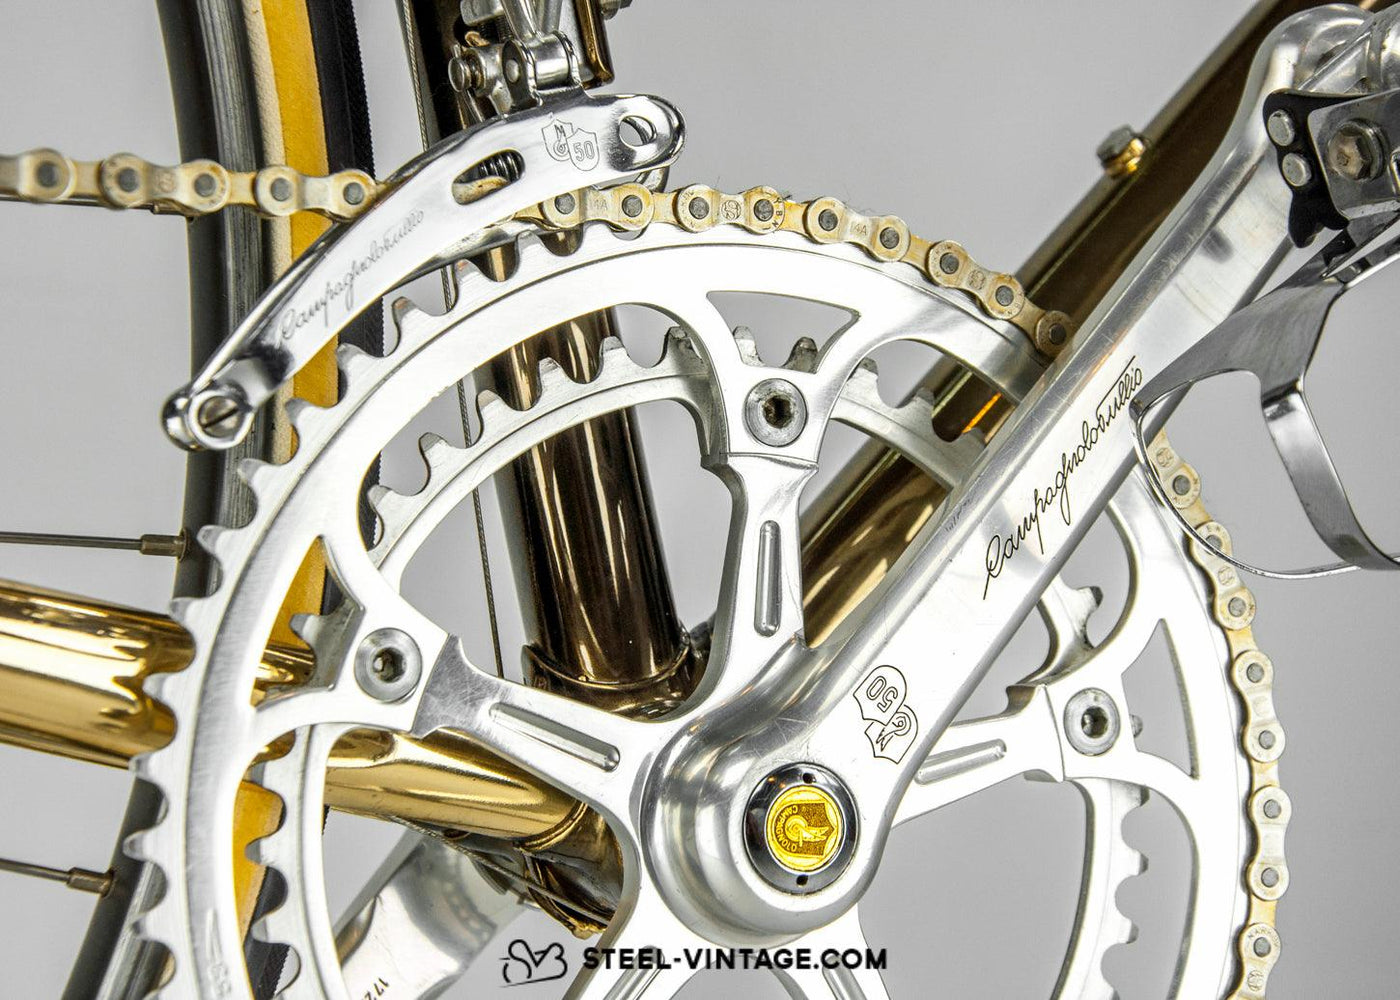 Vicini Oro Anniversary Gold Plated Bicycle Campagnolo 50th Anniversary - Steel Vintage Bikes